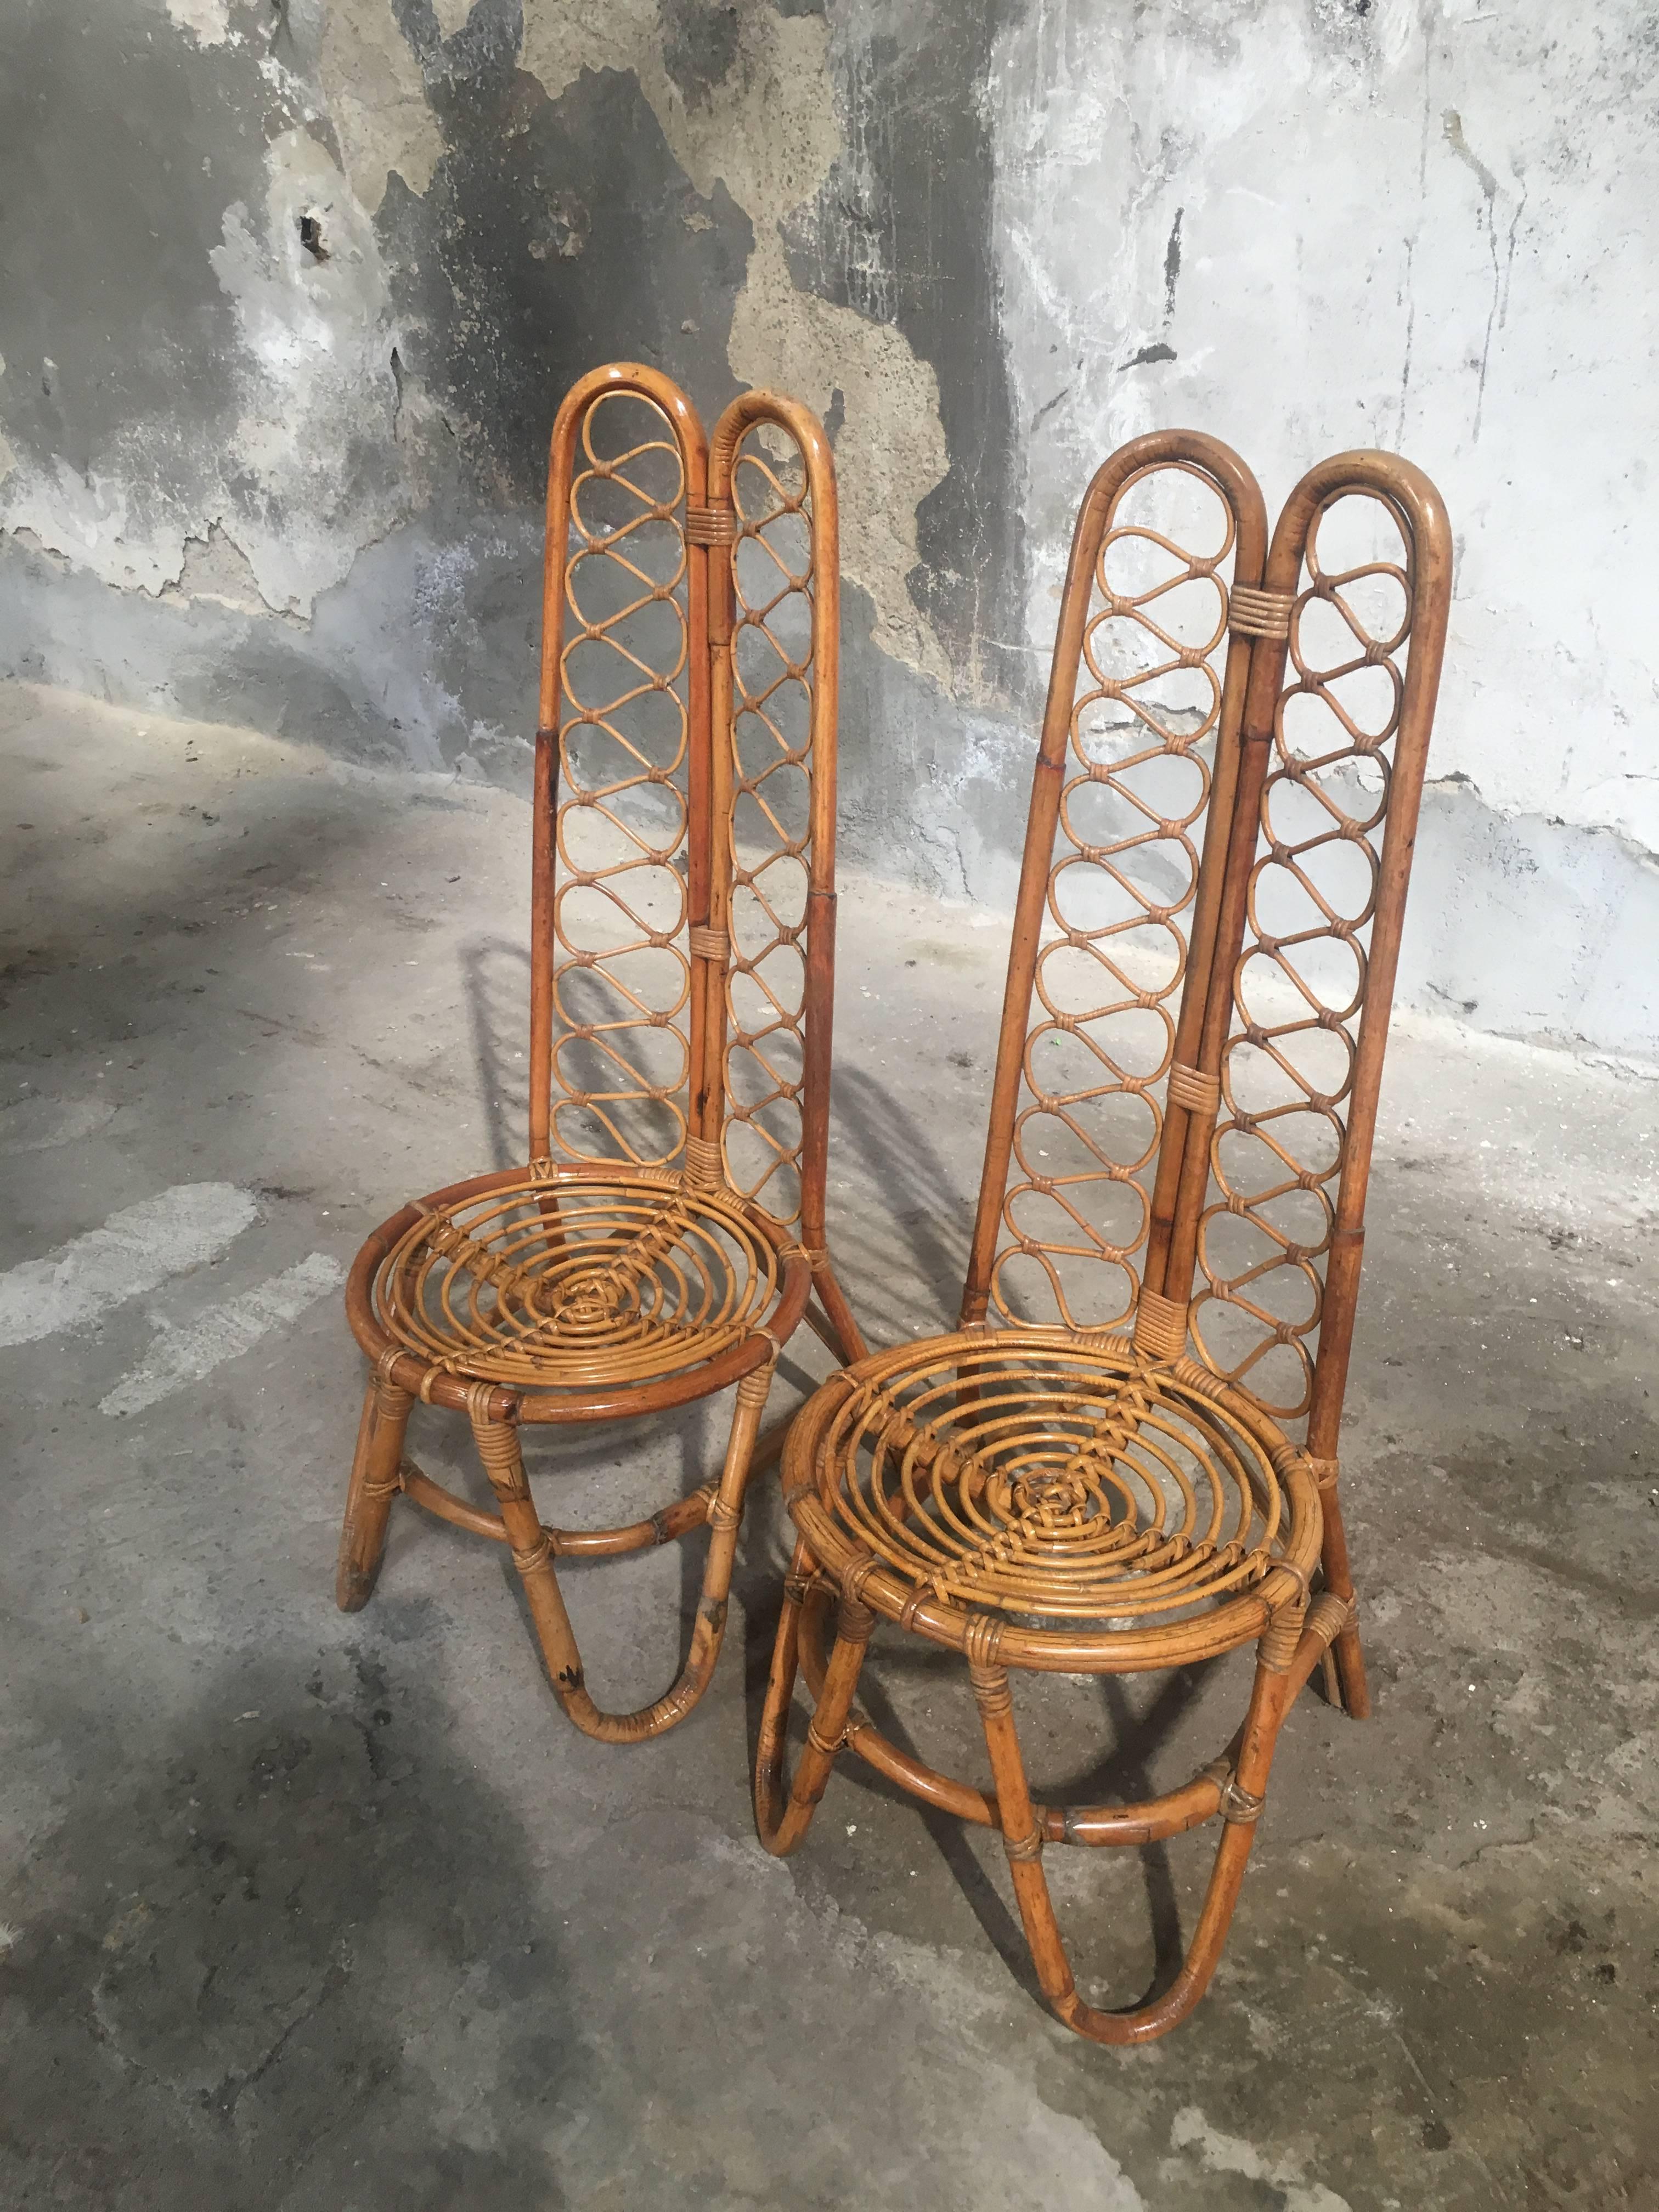 Set of two French Riviera midcentury bamboo chairs with double high back,
France, 1970s.